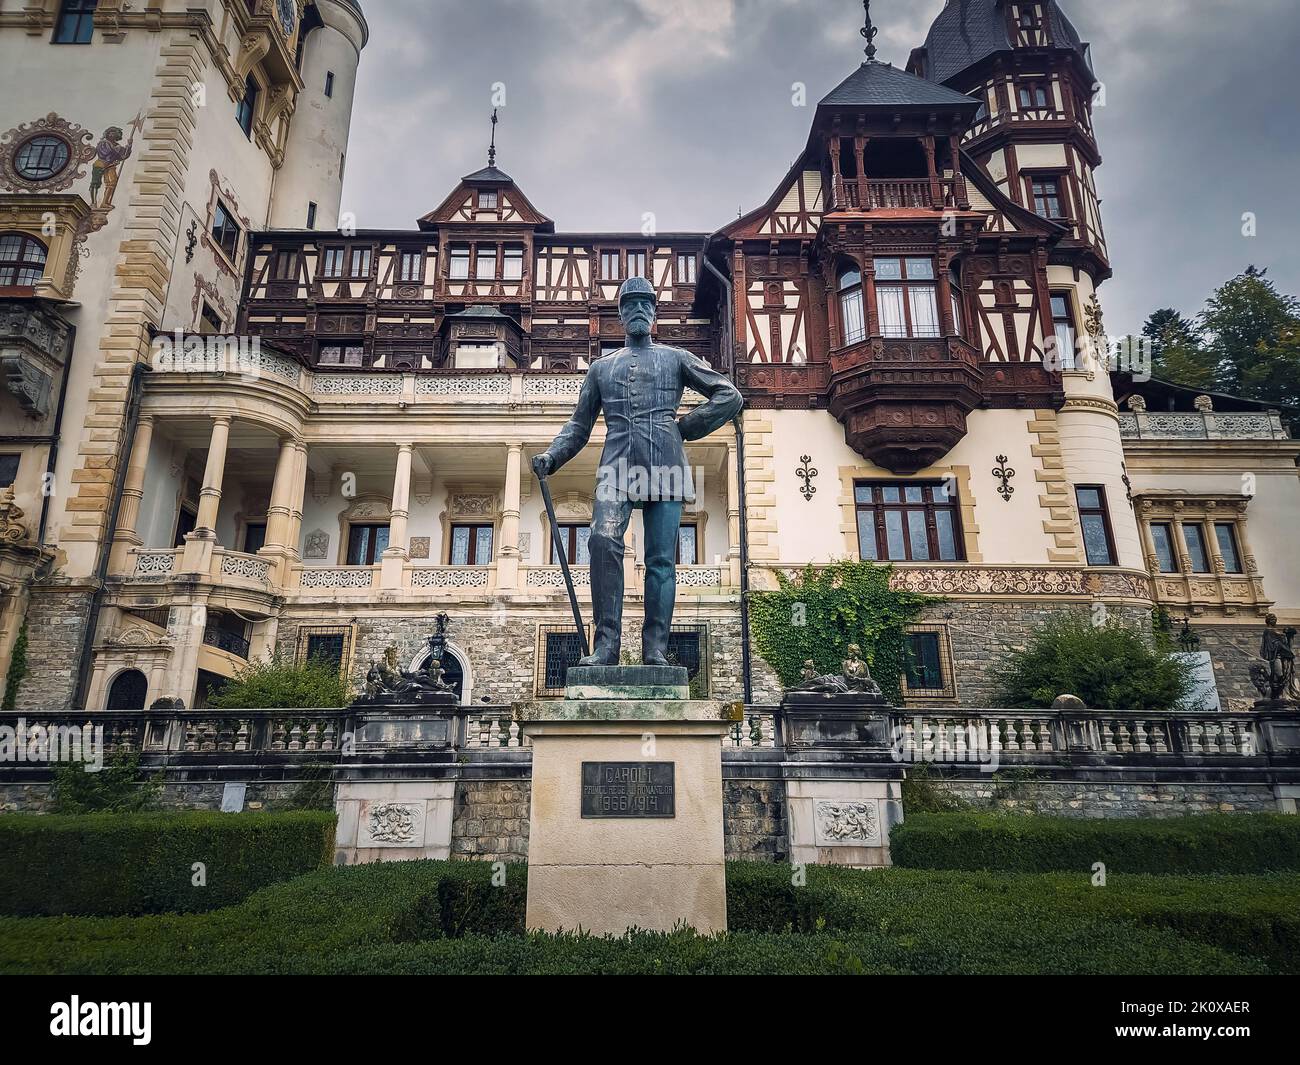 The statue of Carol 1 first king of Romania, in front of Peles Castle Stock Photo